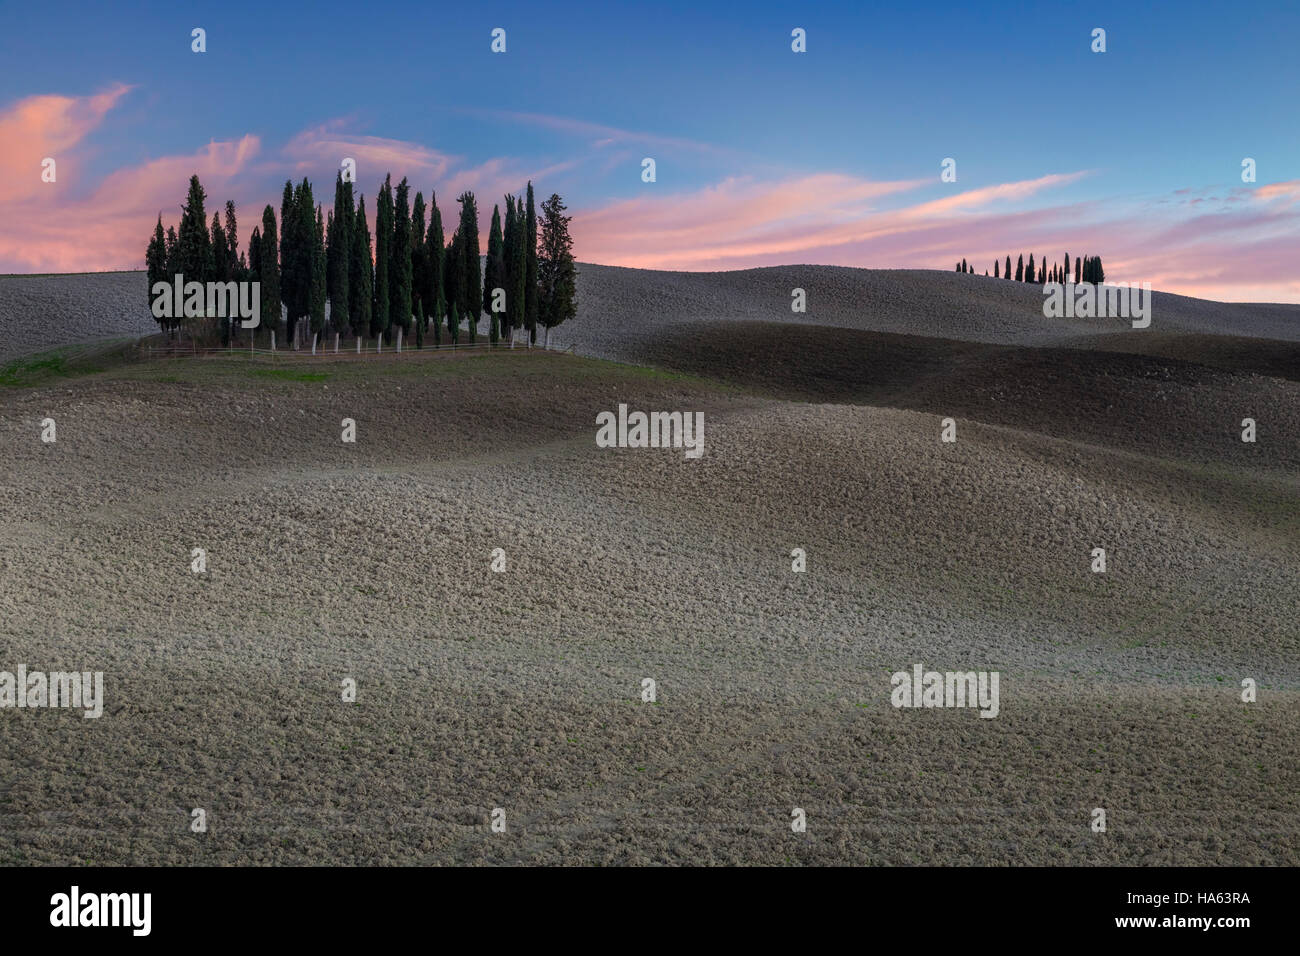 Sunset at the cypresses near San Quirico d'Orcia, Val d'Orcia, Tuscany, Italy. Stock Photo